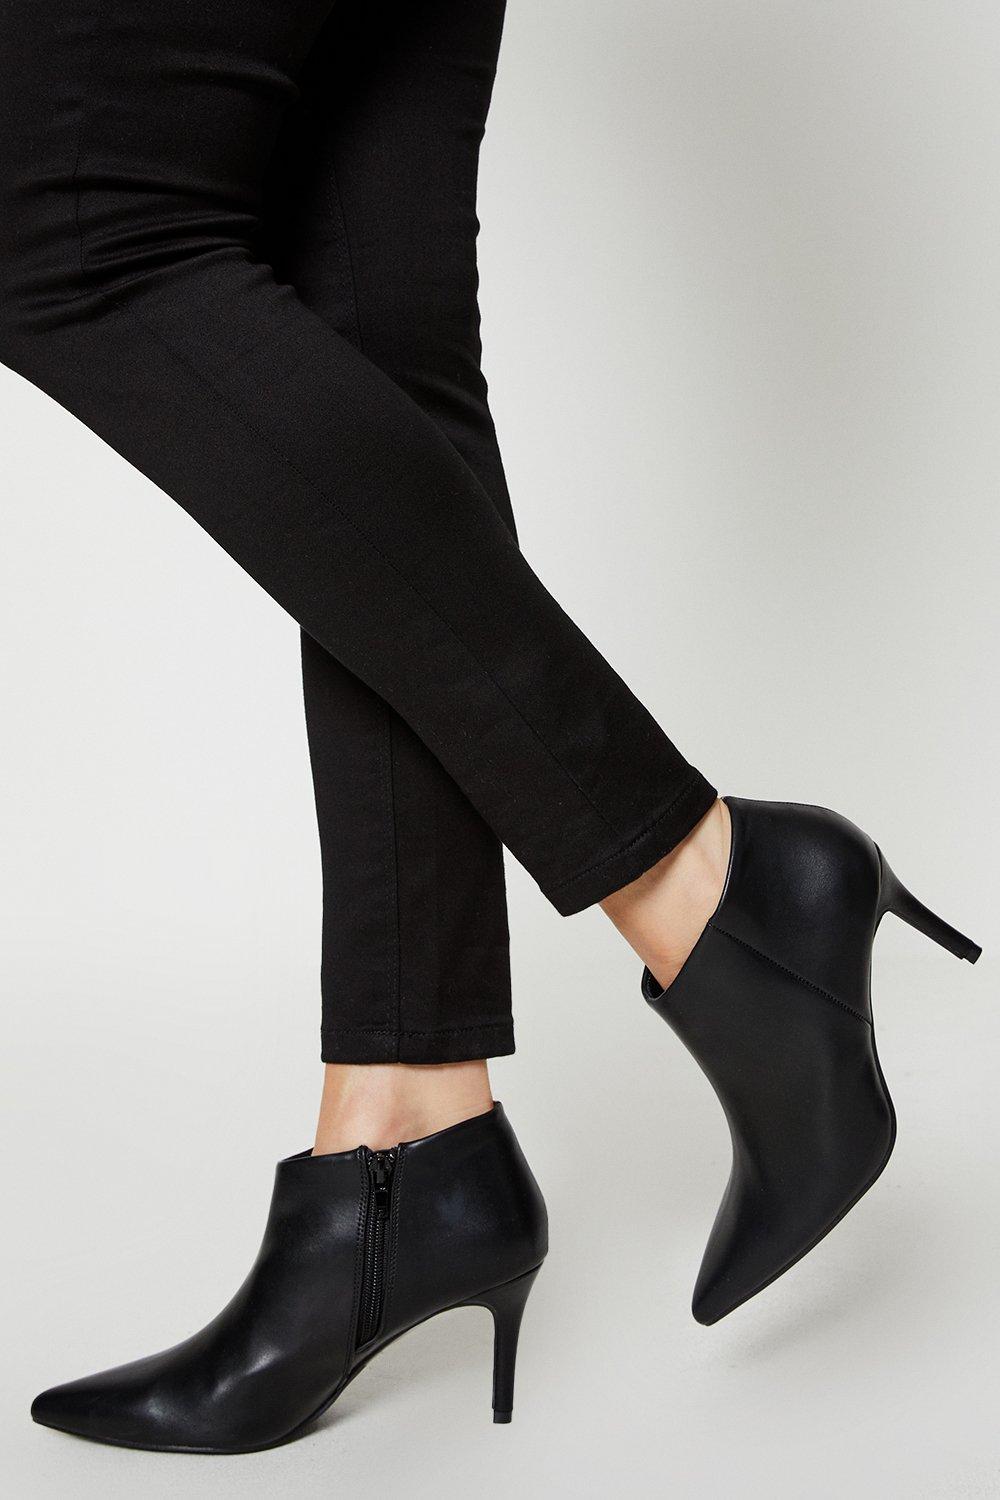 Womens Principles: Odette Pointed Stiletto Heel Shoe Boots